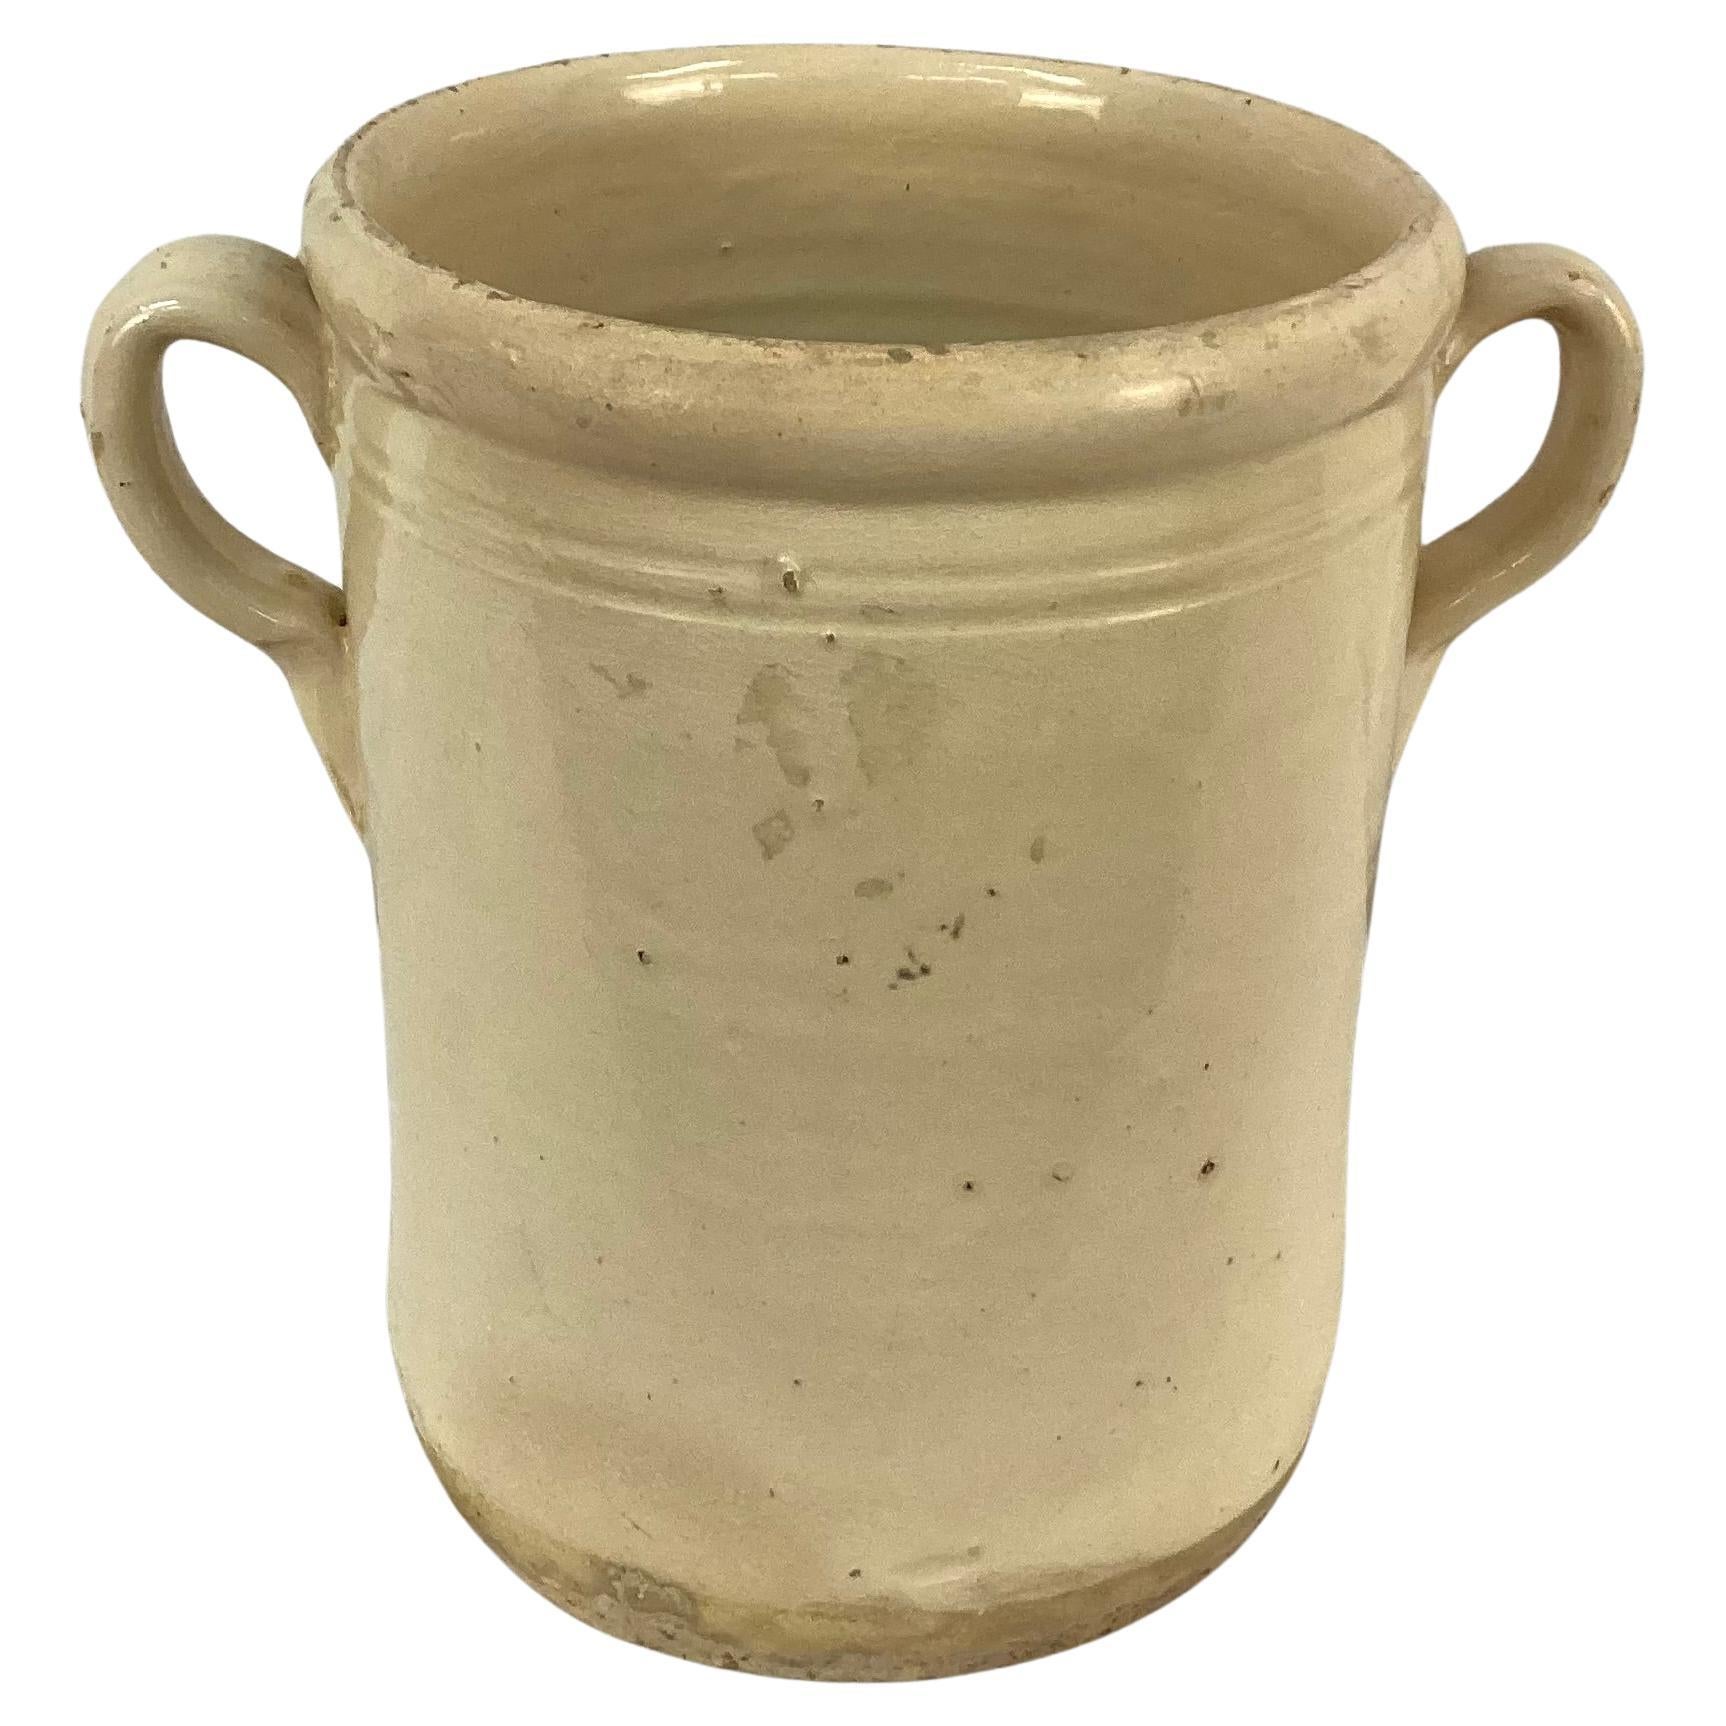 19th Century Italian ceramic chiminea preserve pot with handles. These pots were used to preserve food such as fruits, meat or vegetables. They were designed to be used in conjunction with wood-burning stove or fireplace as warmth helped preserve